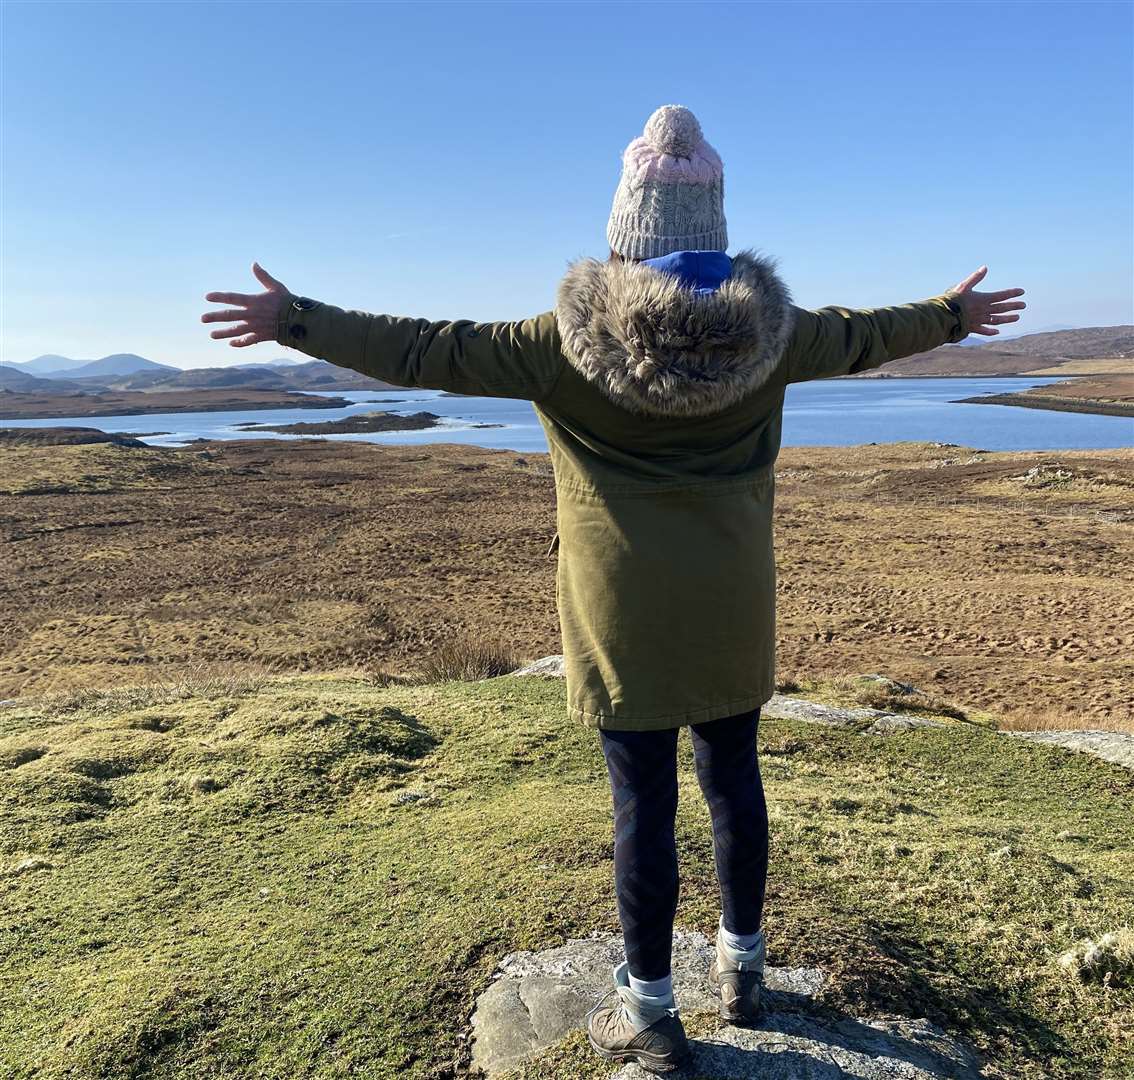 One of Siobhan's life-long dreams was to visit the Outer Hebrides, which she got to do this year